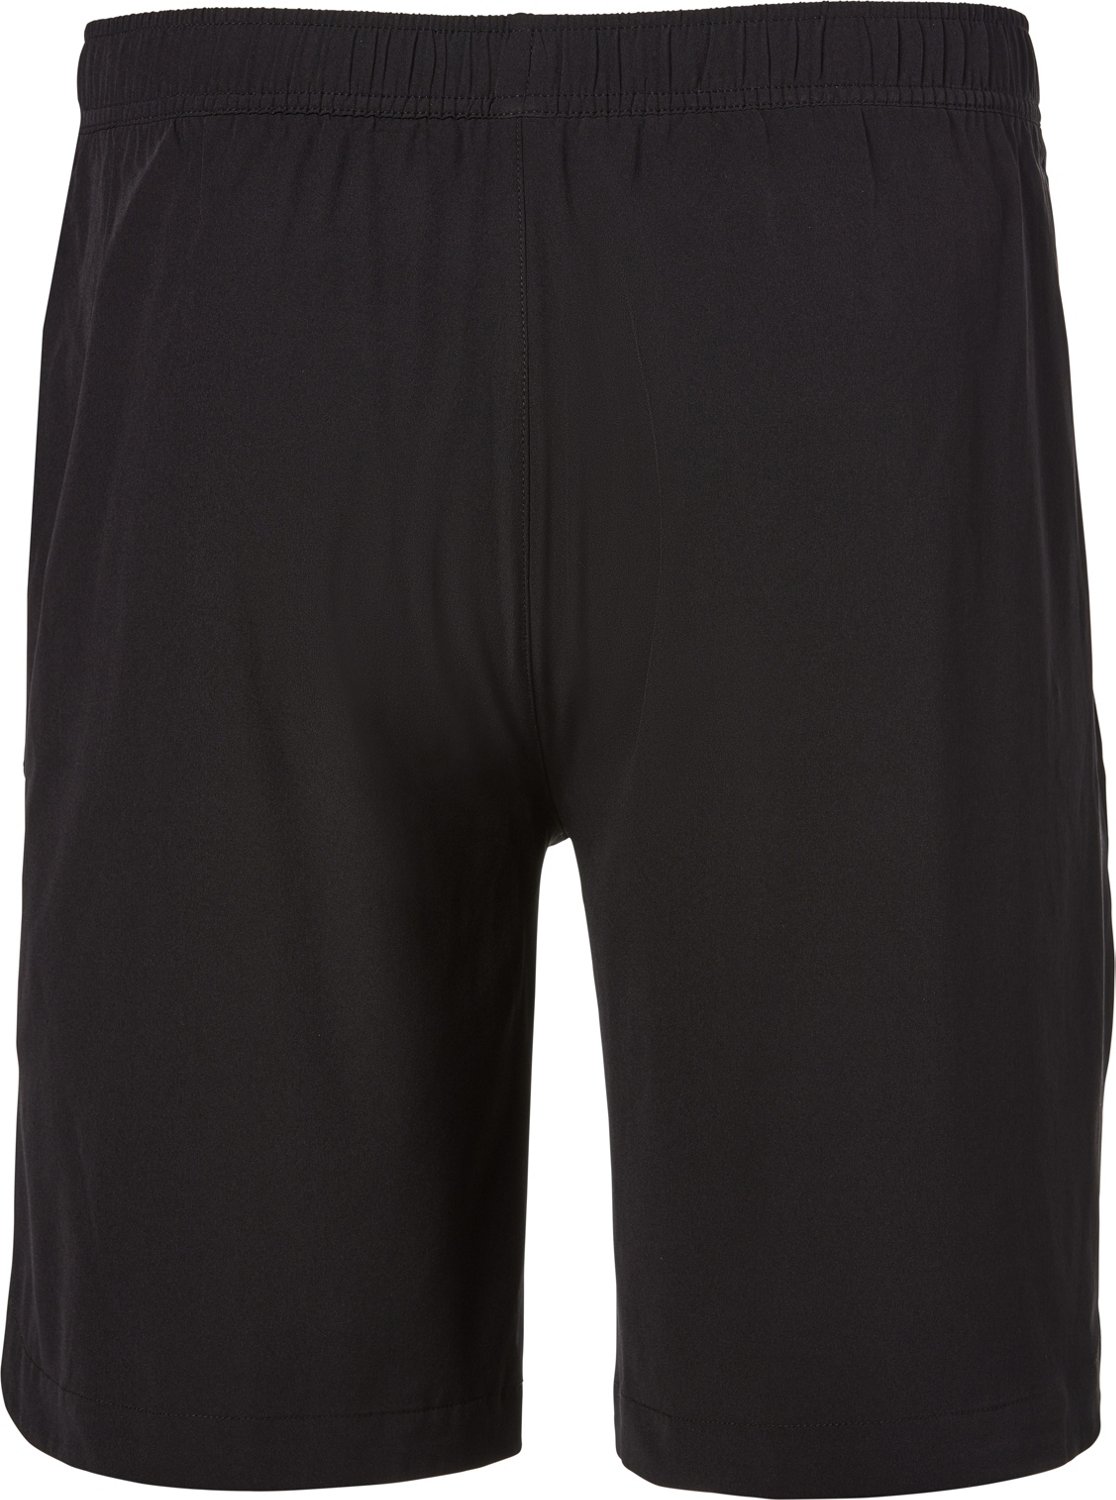 BCG Men's Dash 2-in-1 Shorts 9 in | Free Shipping at Academy